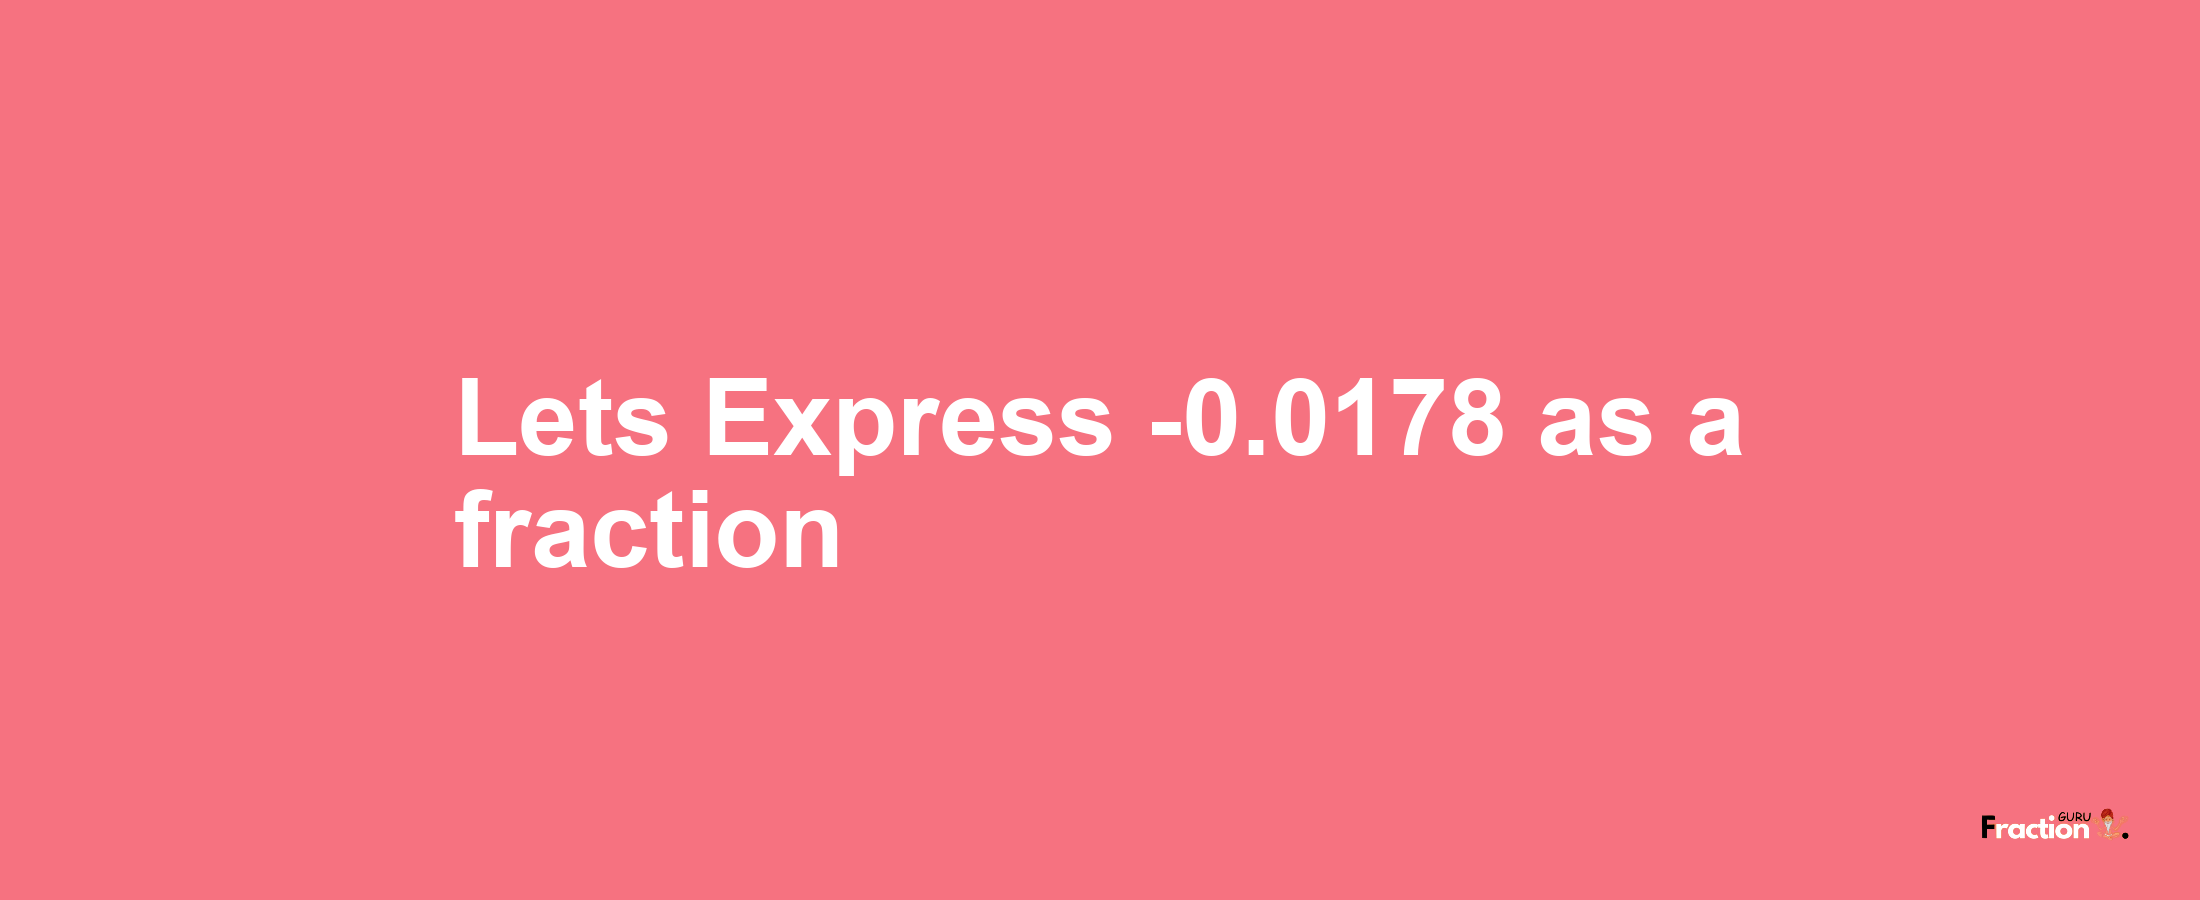 Lets Express -0.0178 as afraction